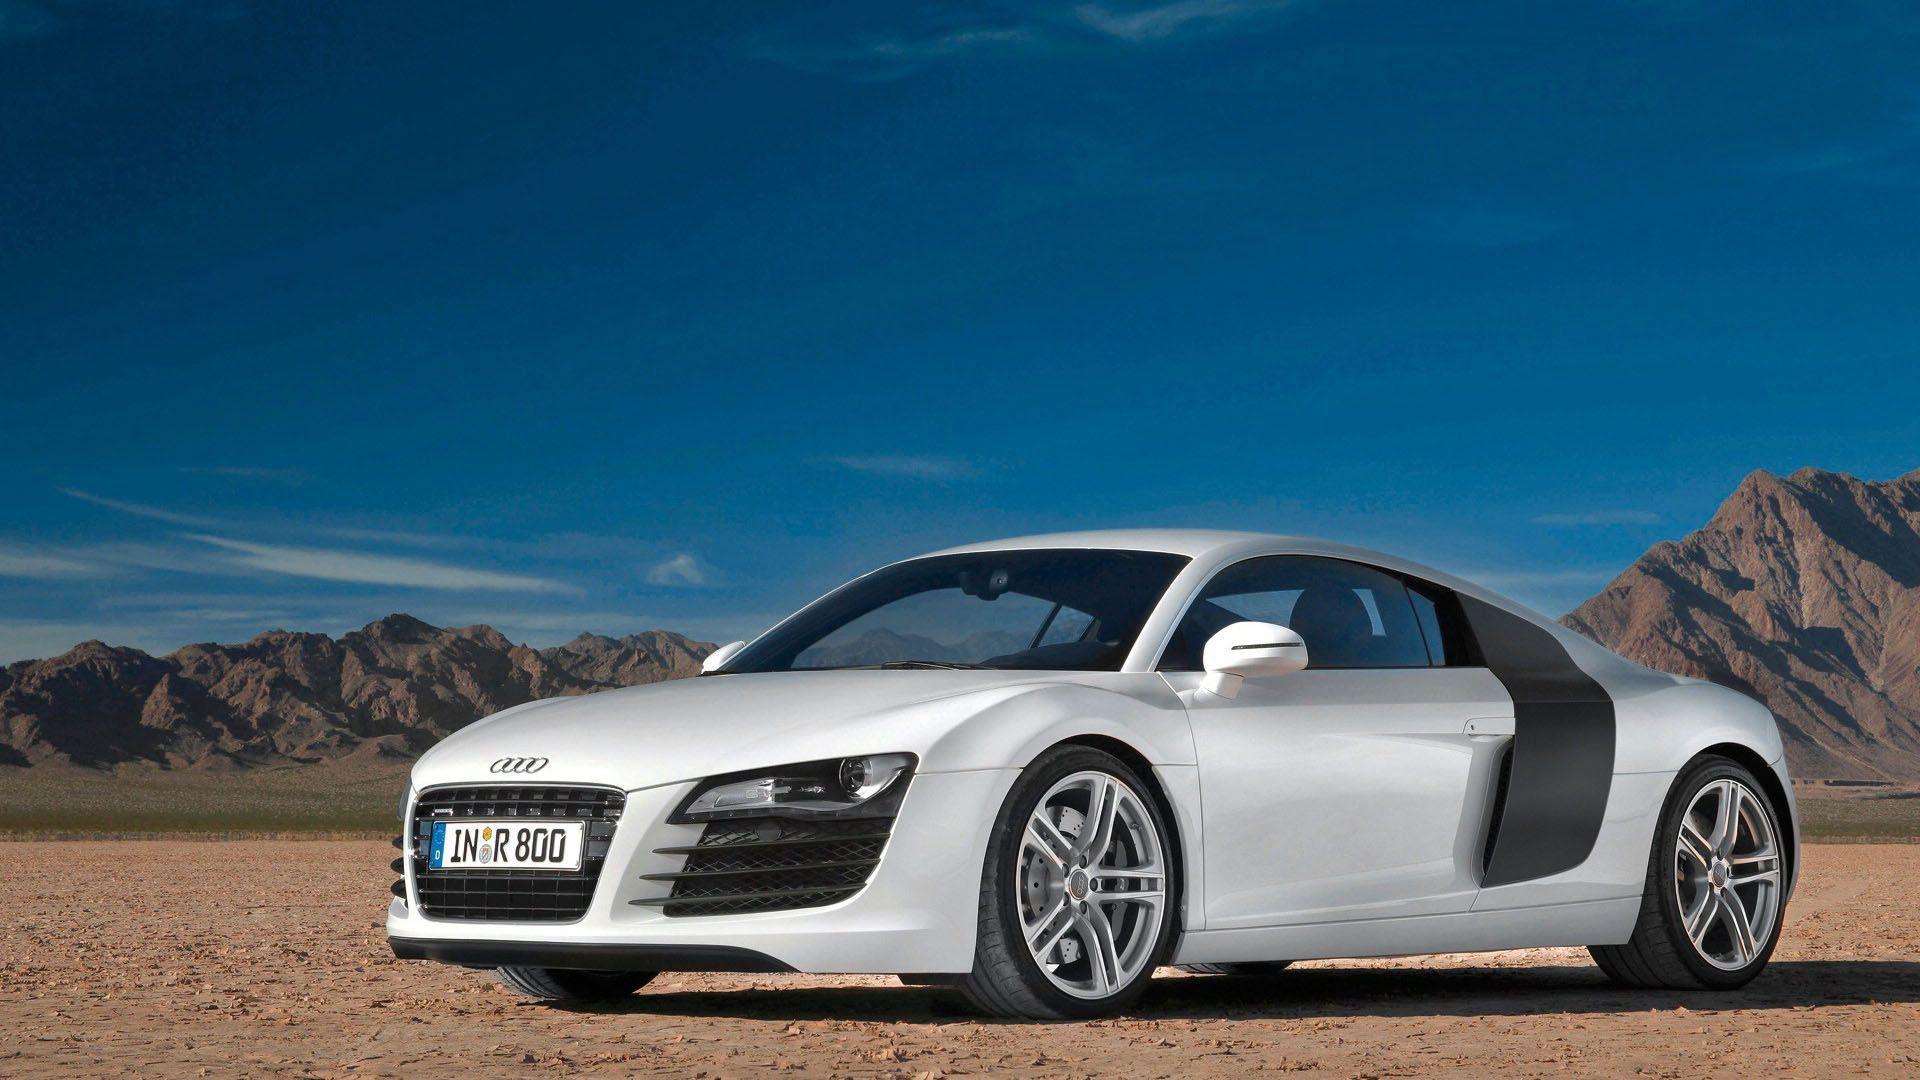 Nothing found for Audi R8 Wallpaper Car Desk 1080 HD